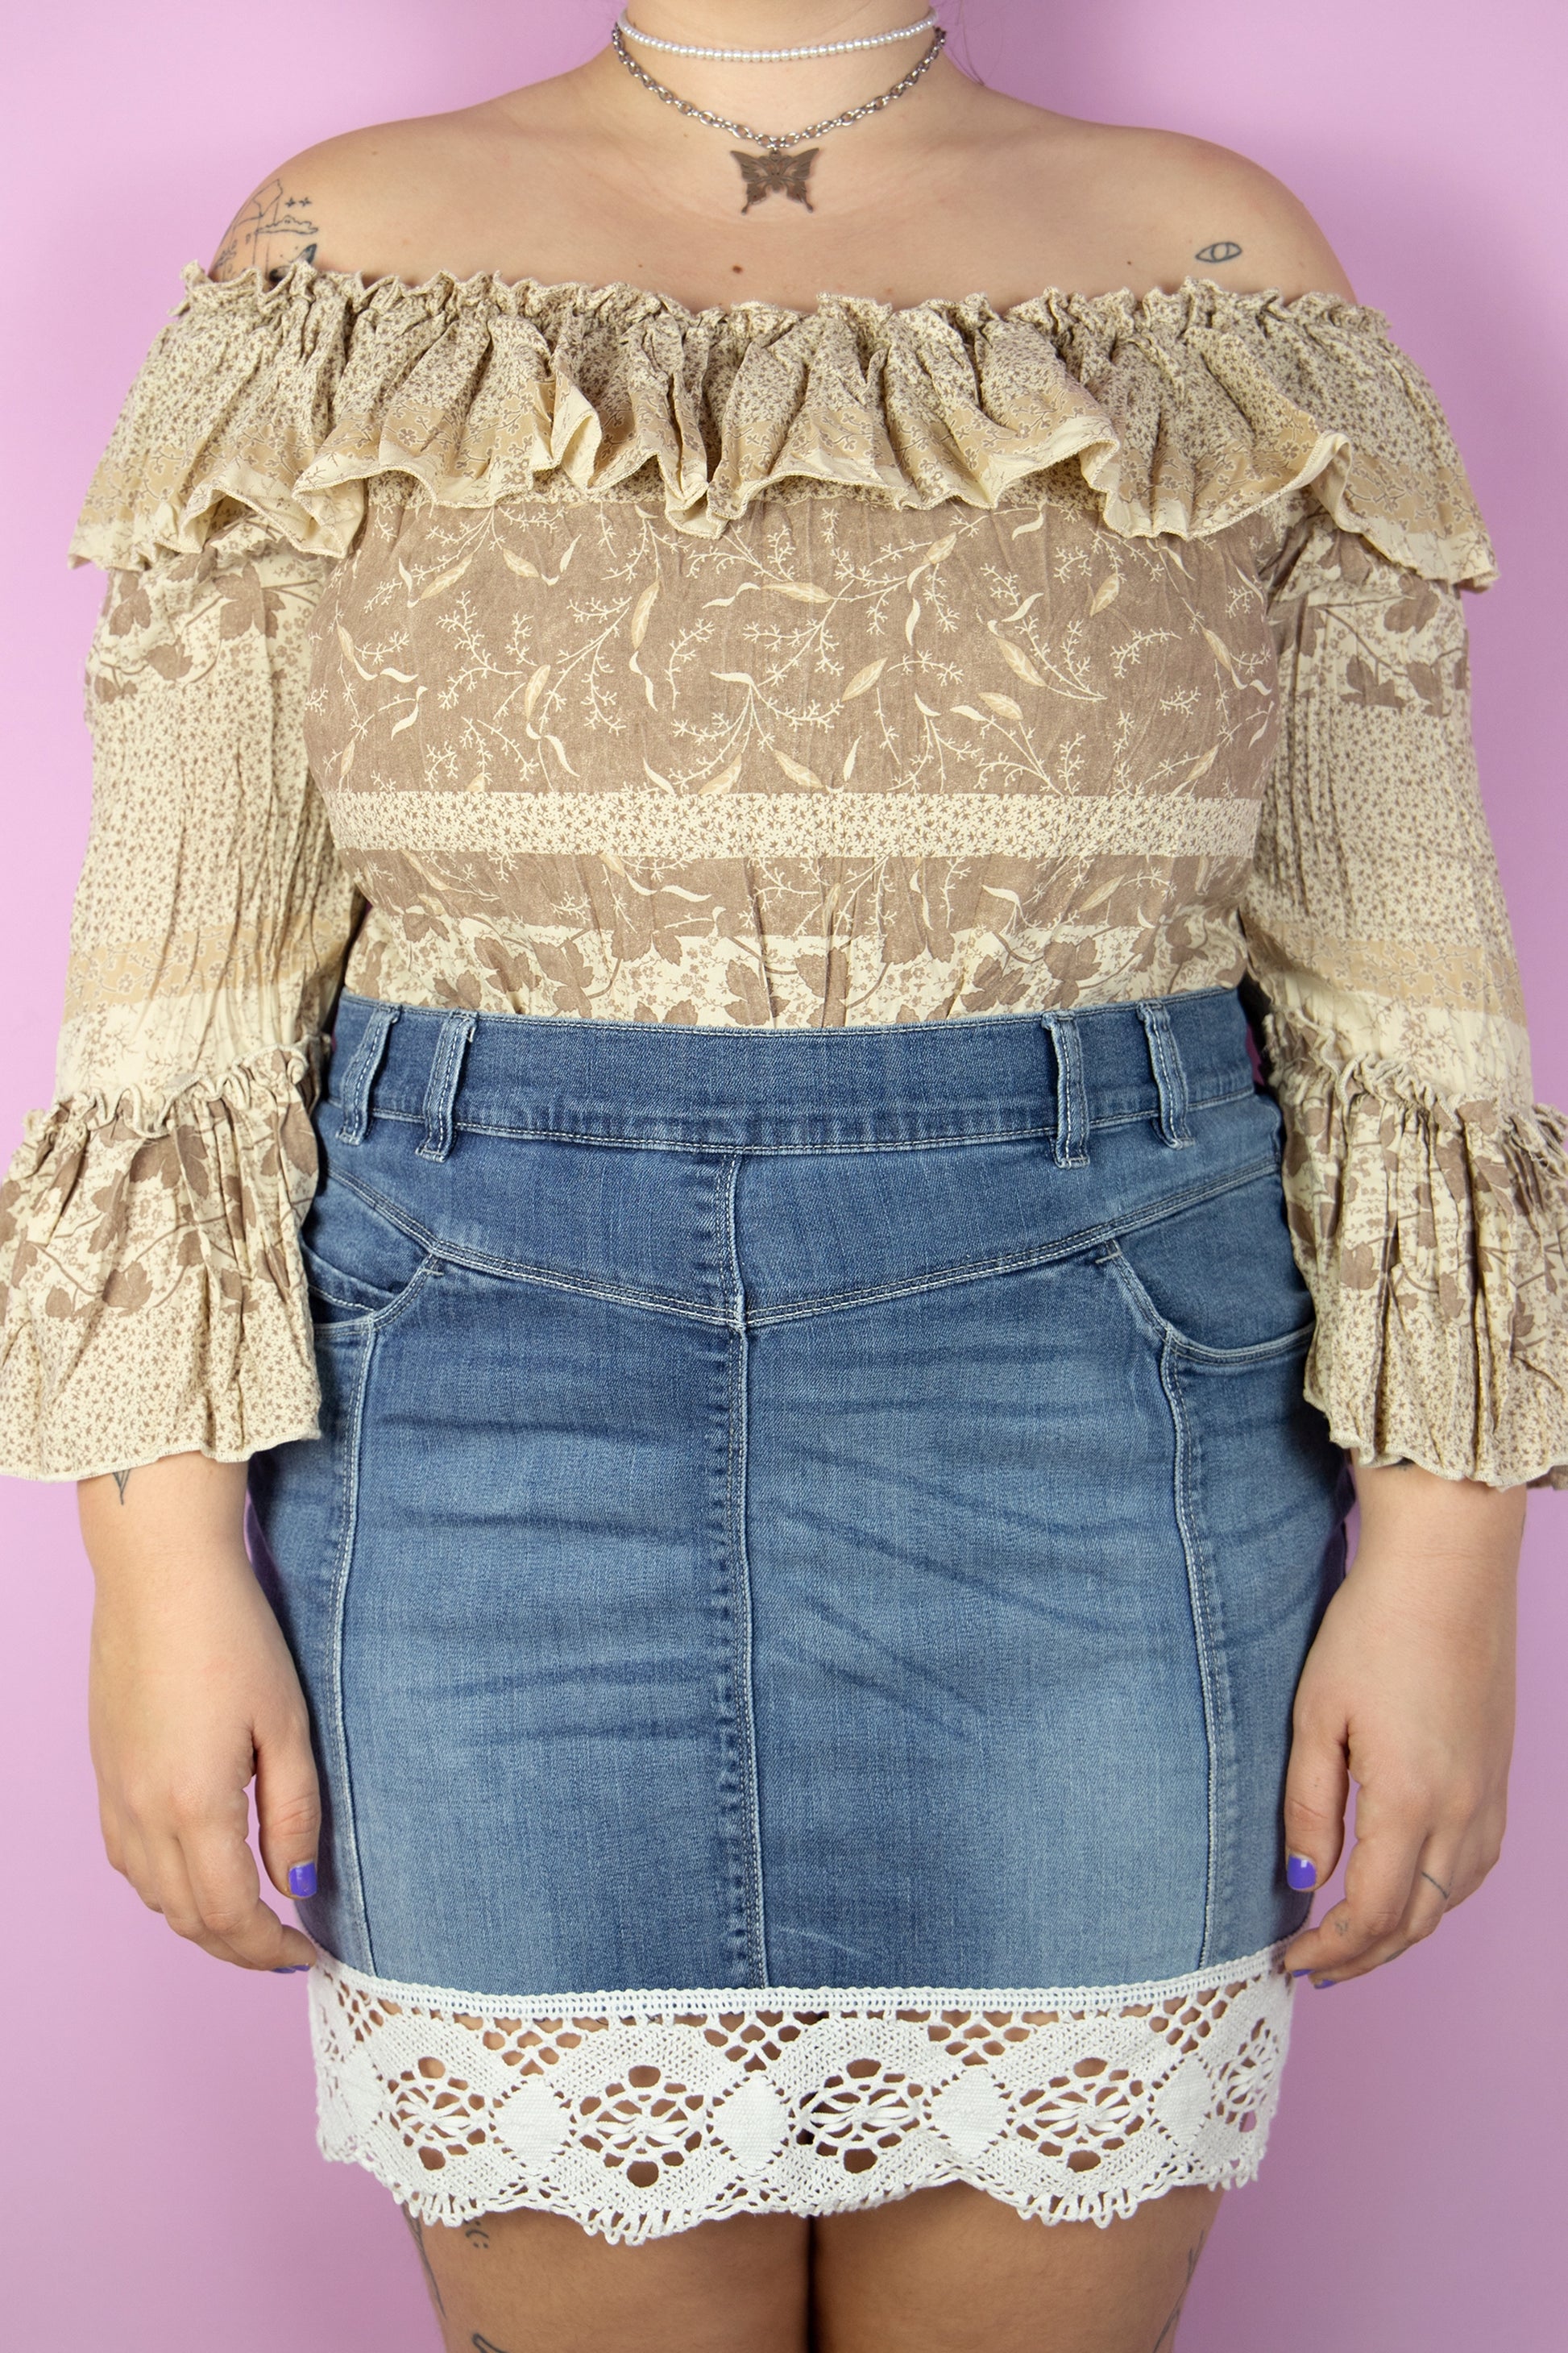 The Vintage 90’s Beige Off-Shoulder Top is an off-the-shoulder blouse with beige and brown floral patterns, featuring charming ruffles and bell sleeves. This lovely cottage prairie boho top captures the essence of spring and summer fashion from the 1990s.